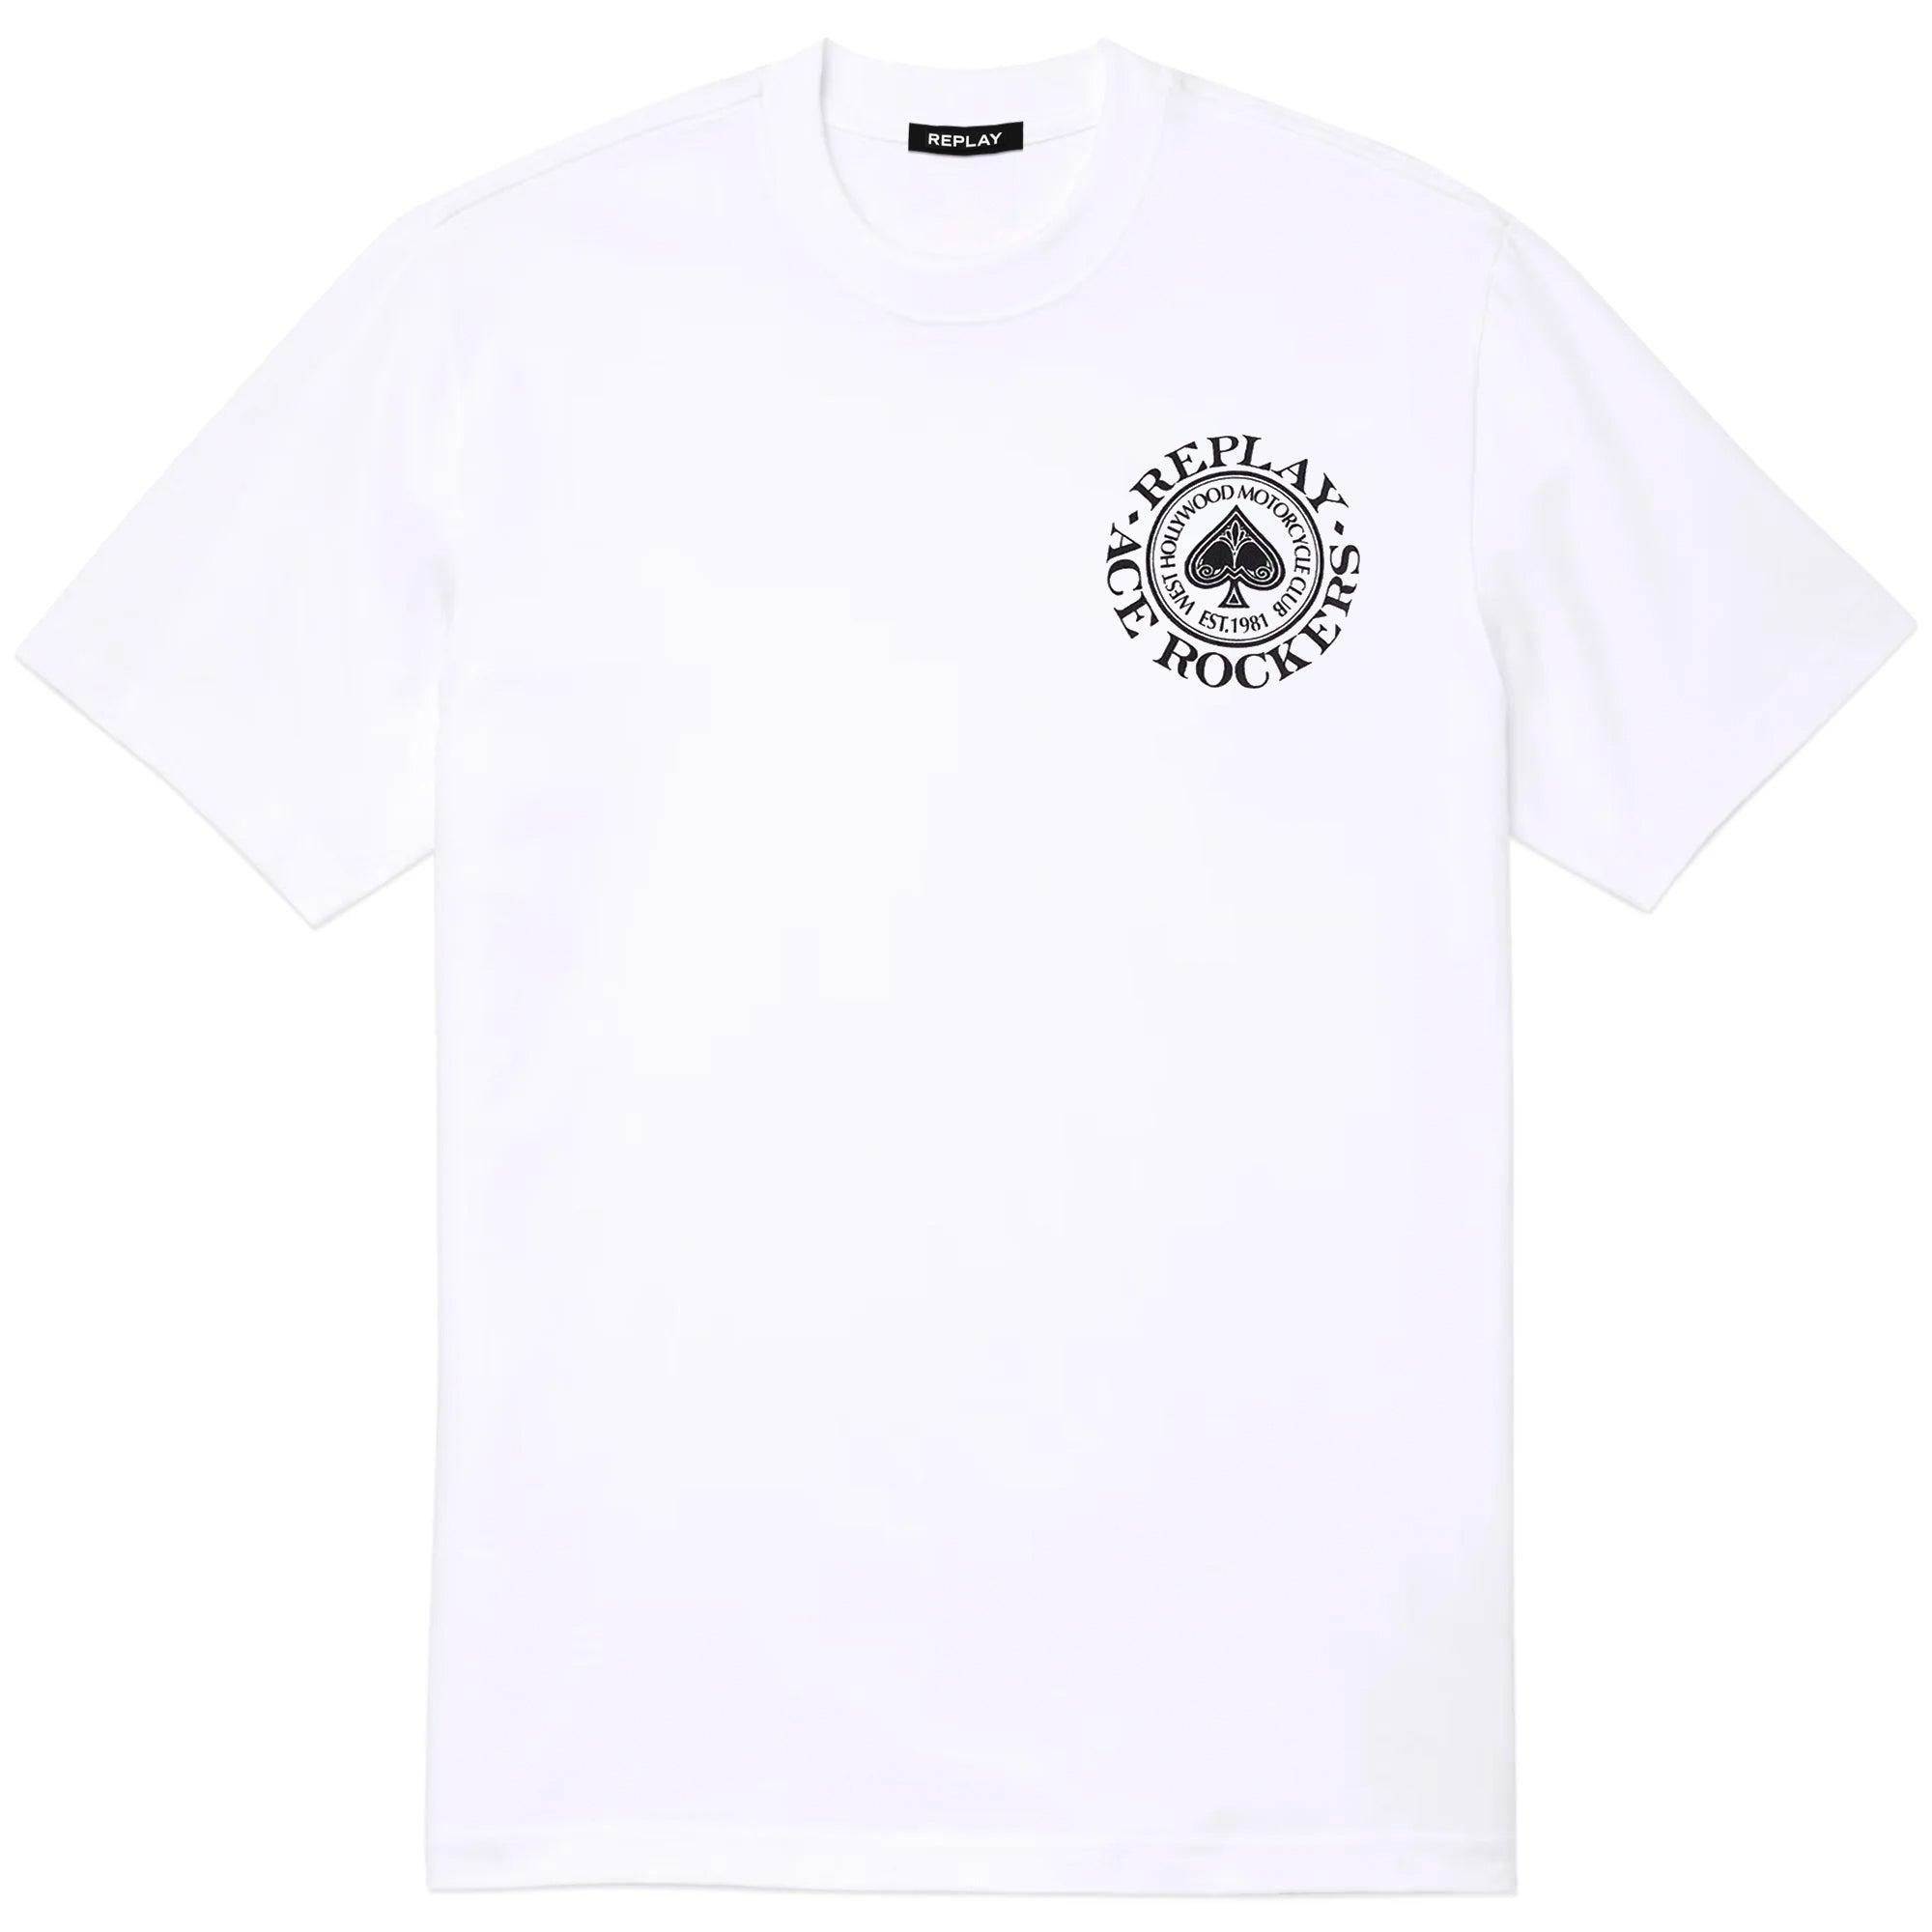 Replay Ace Of Spades Rockers | T-shirt in Lyst Men for White